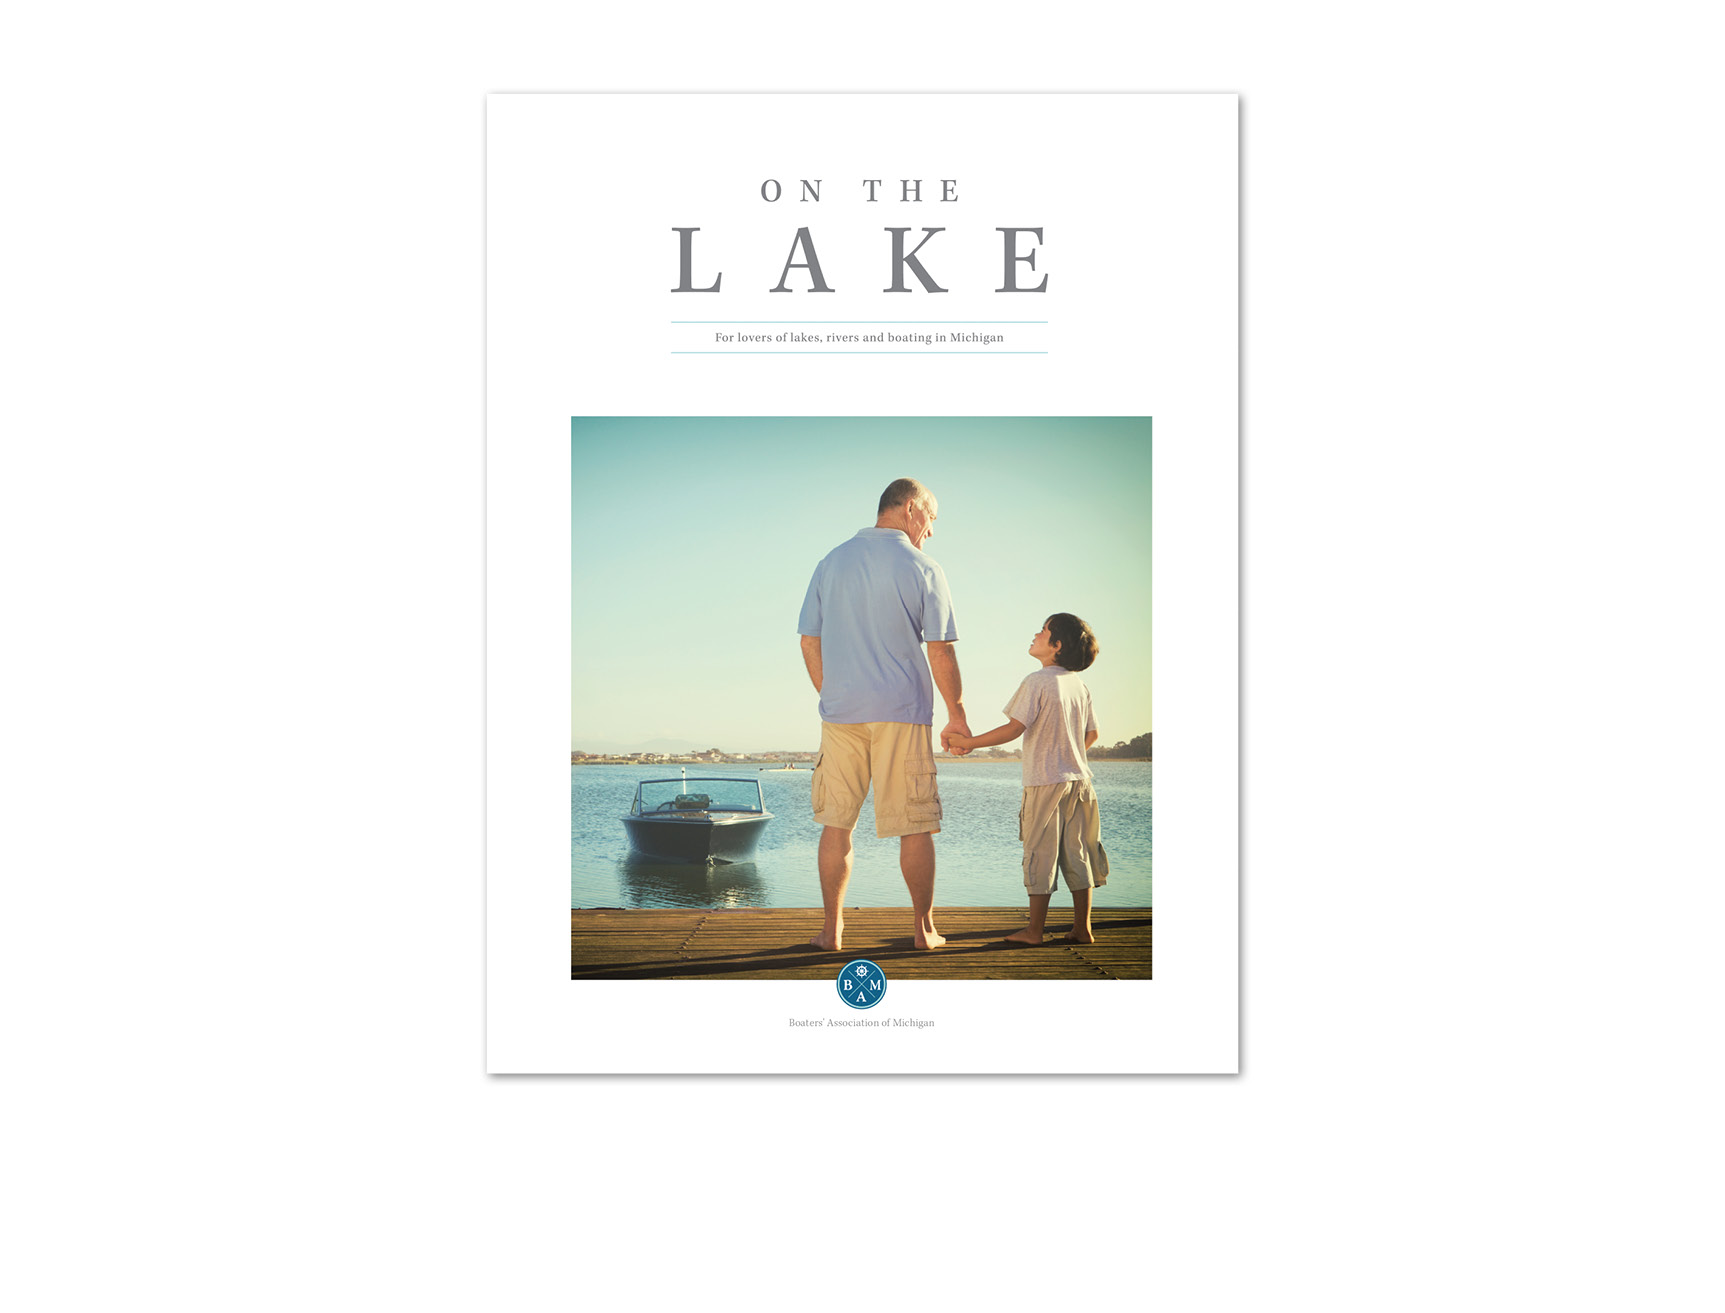  Cover for the first issue of  ON THE LAKE . (Winter 2015) 